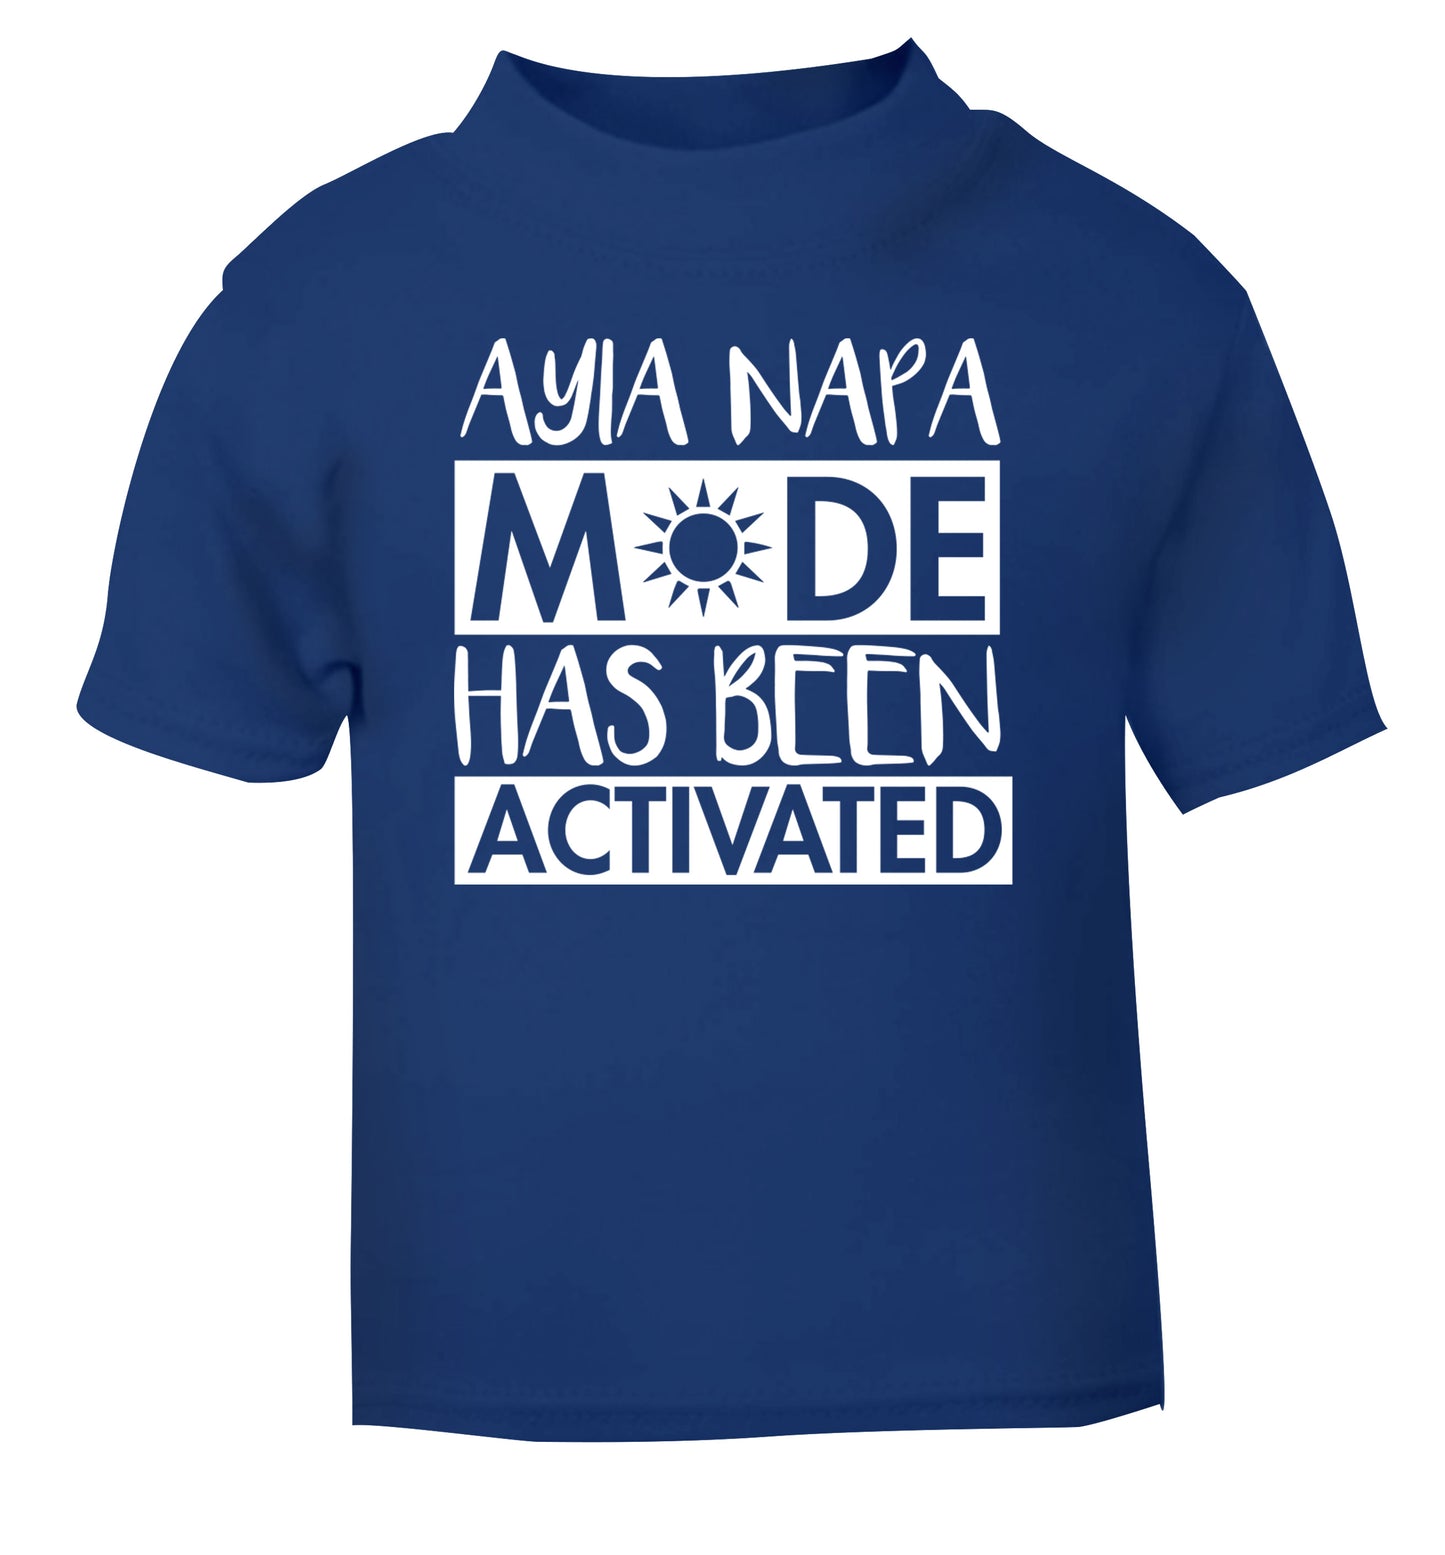 Ayia Napa mode has been activated blue Baby Toddler Tshirt 2 Years